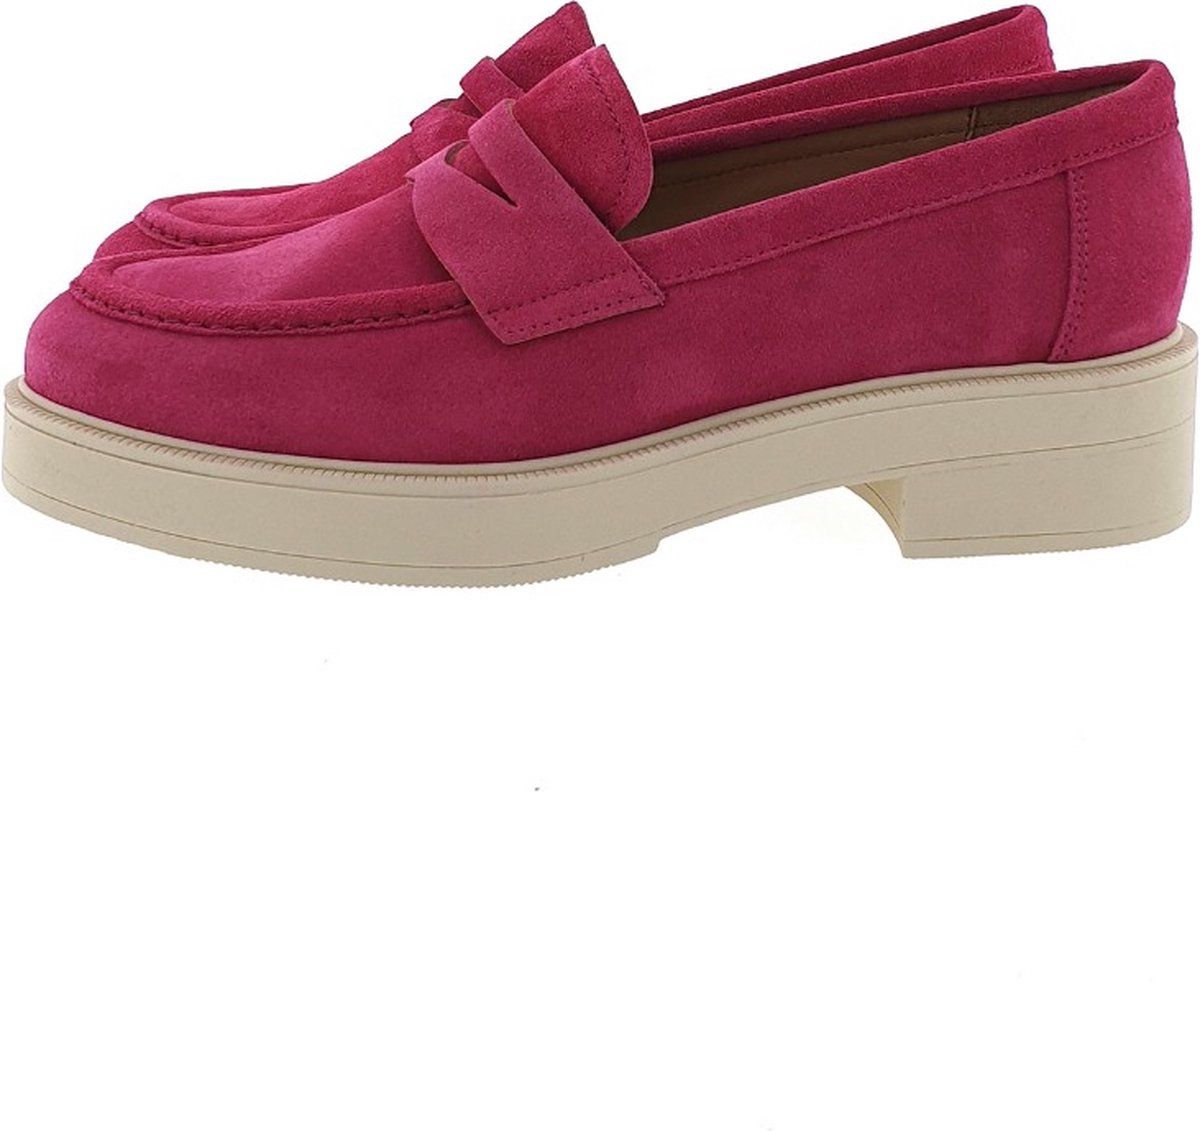 CTWLK London loafer fuxia, 41 / 7